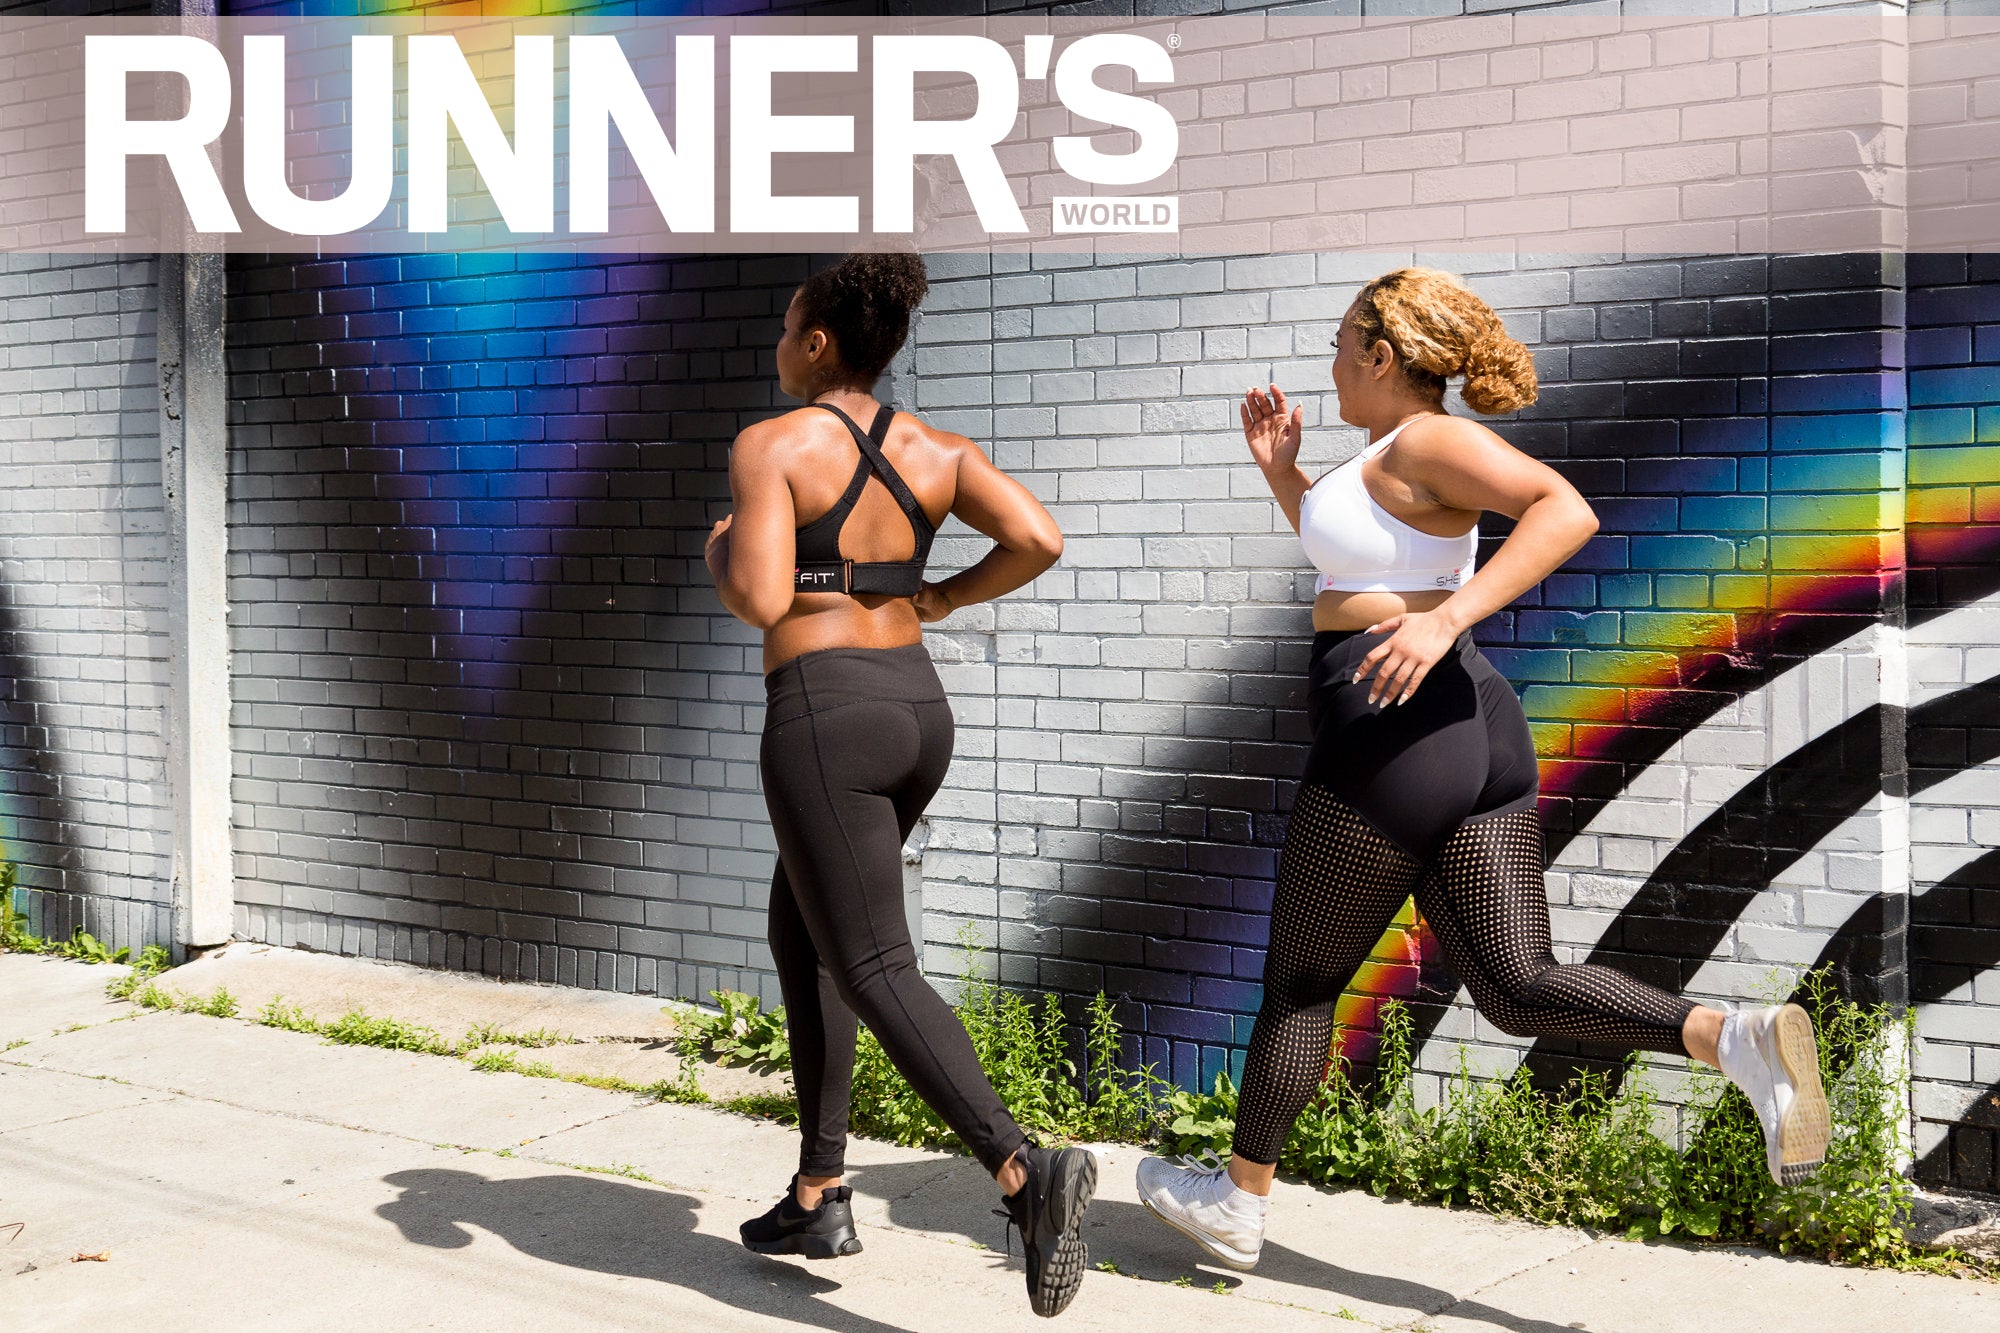 Runner's World: Fully Customize Your Support in the SHEFIT Ultimate Sports Bra